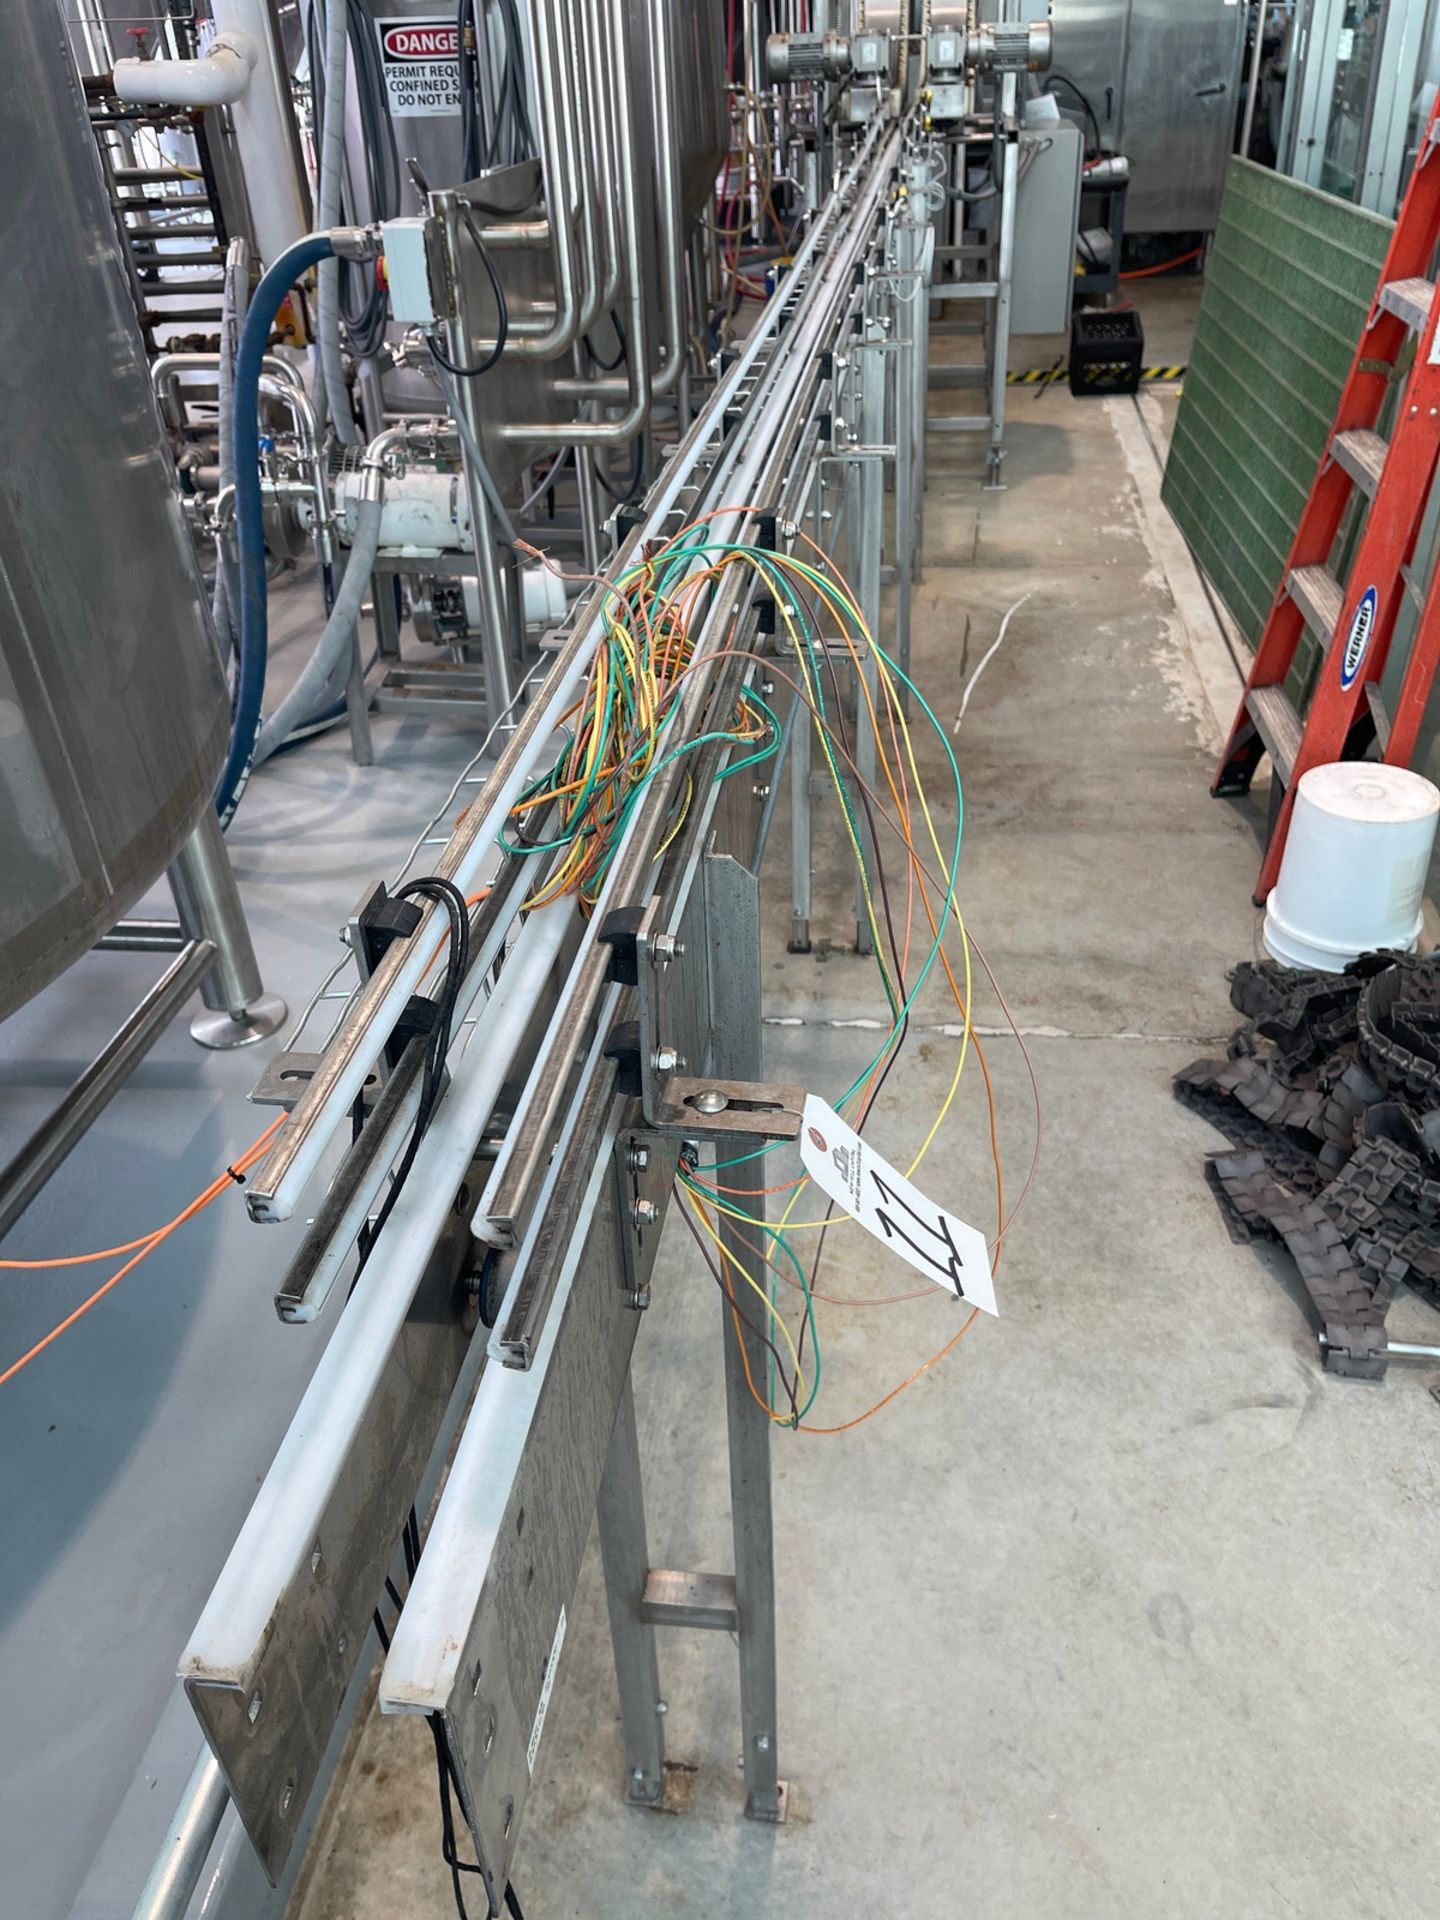 Straight Section of Conveyor Between Bottle Drop and Filler/Capper, Approx. 3.25" Be | Rig Fee $300